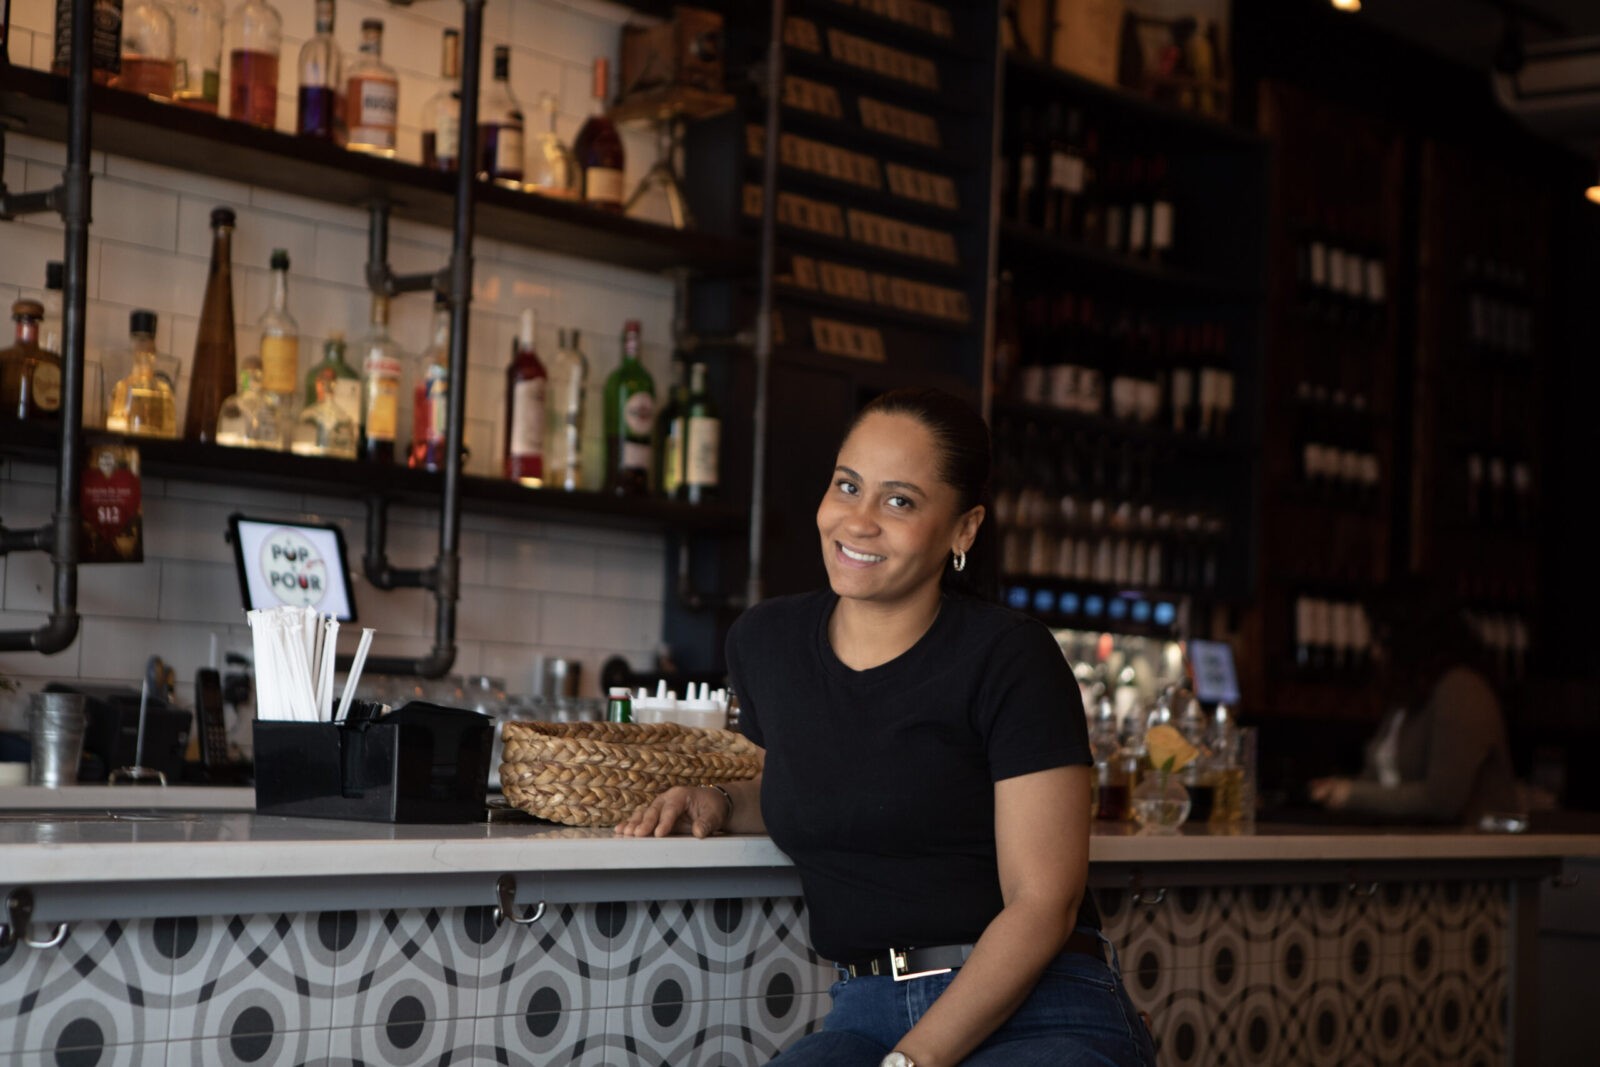 Yajaira sits in front of the bar and smiles at the camera. On the bar is a basket and a container of straws. 